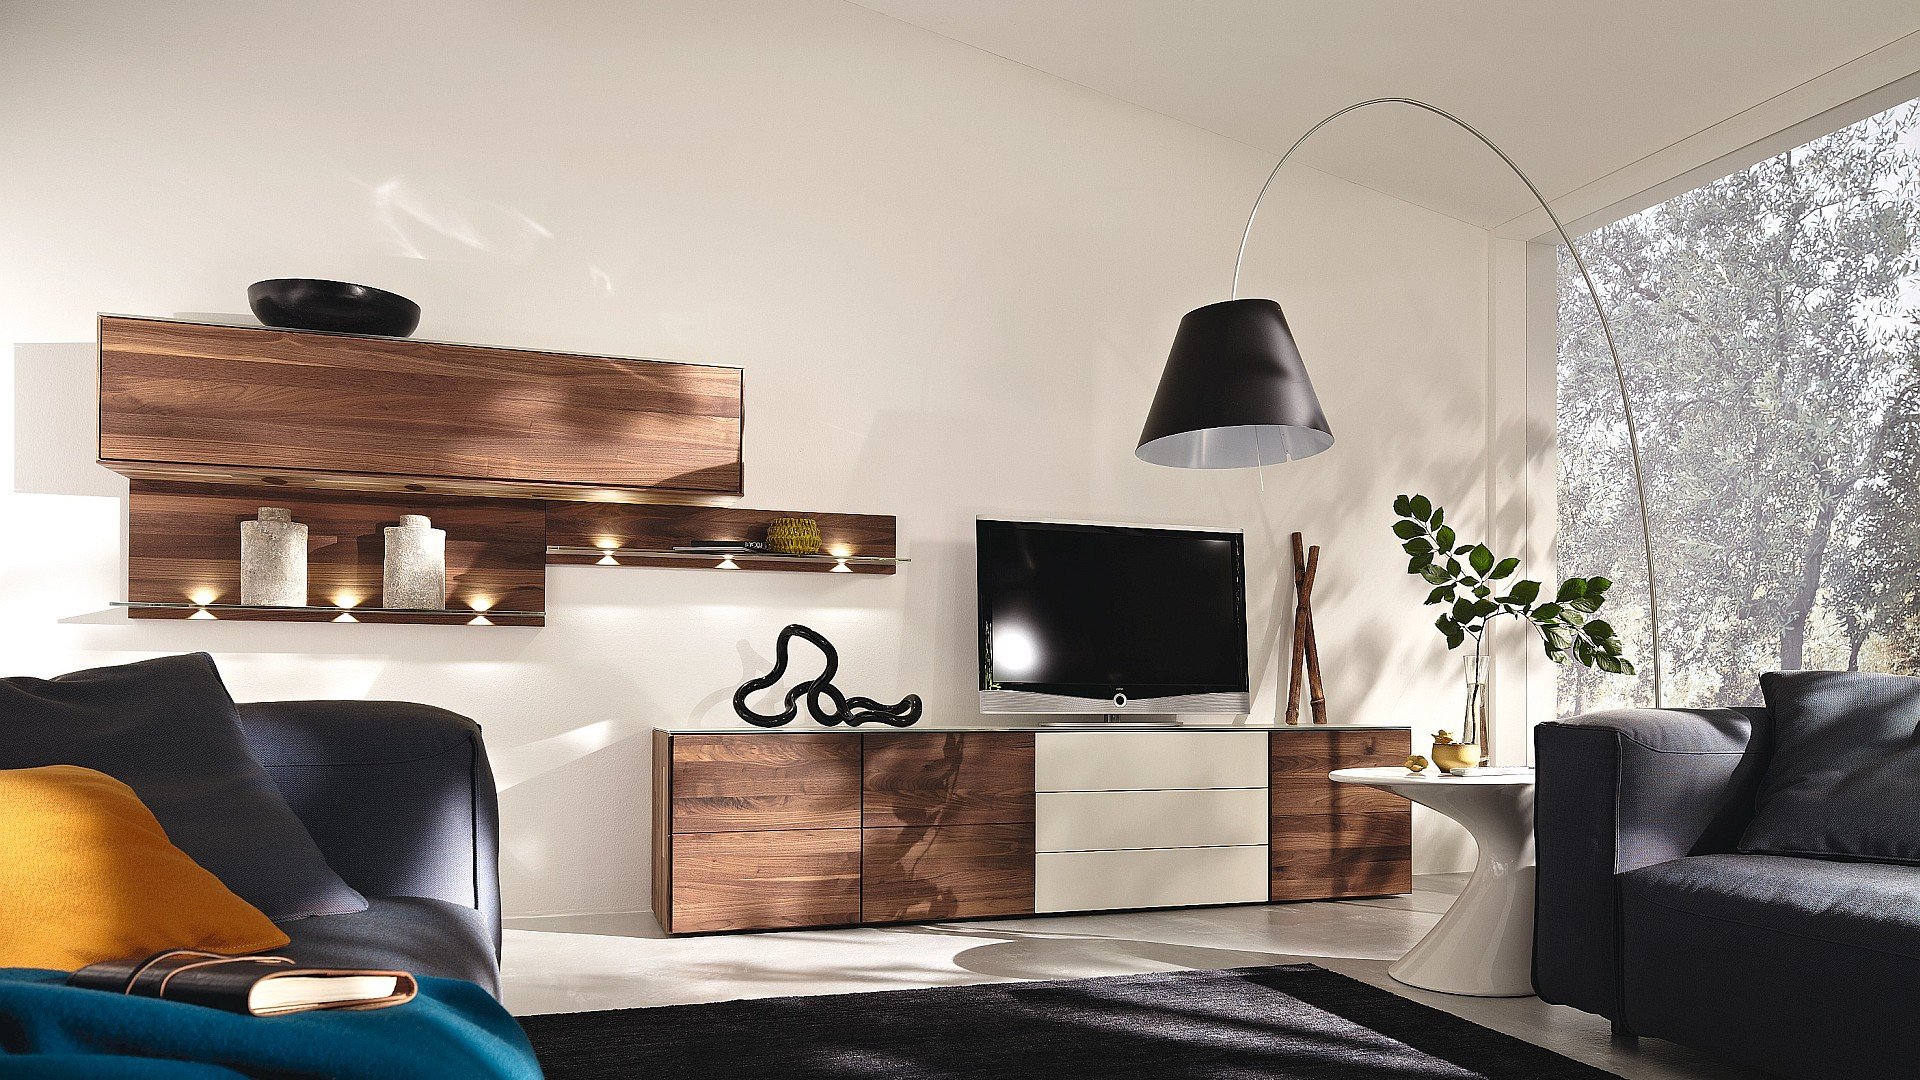 Design of a TV stand in a simple classic style